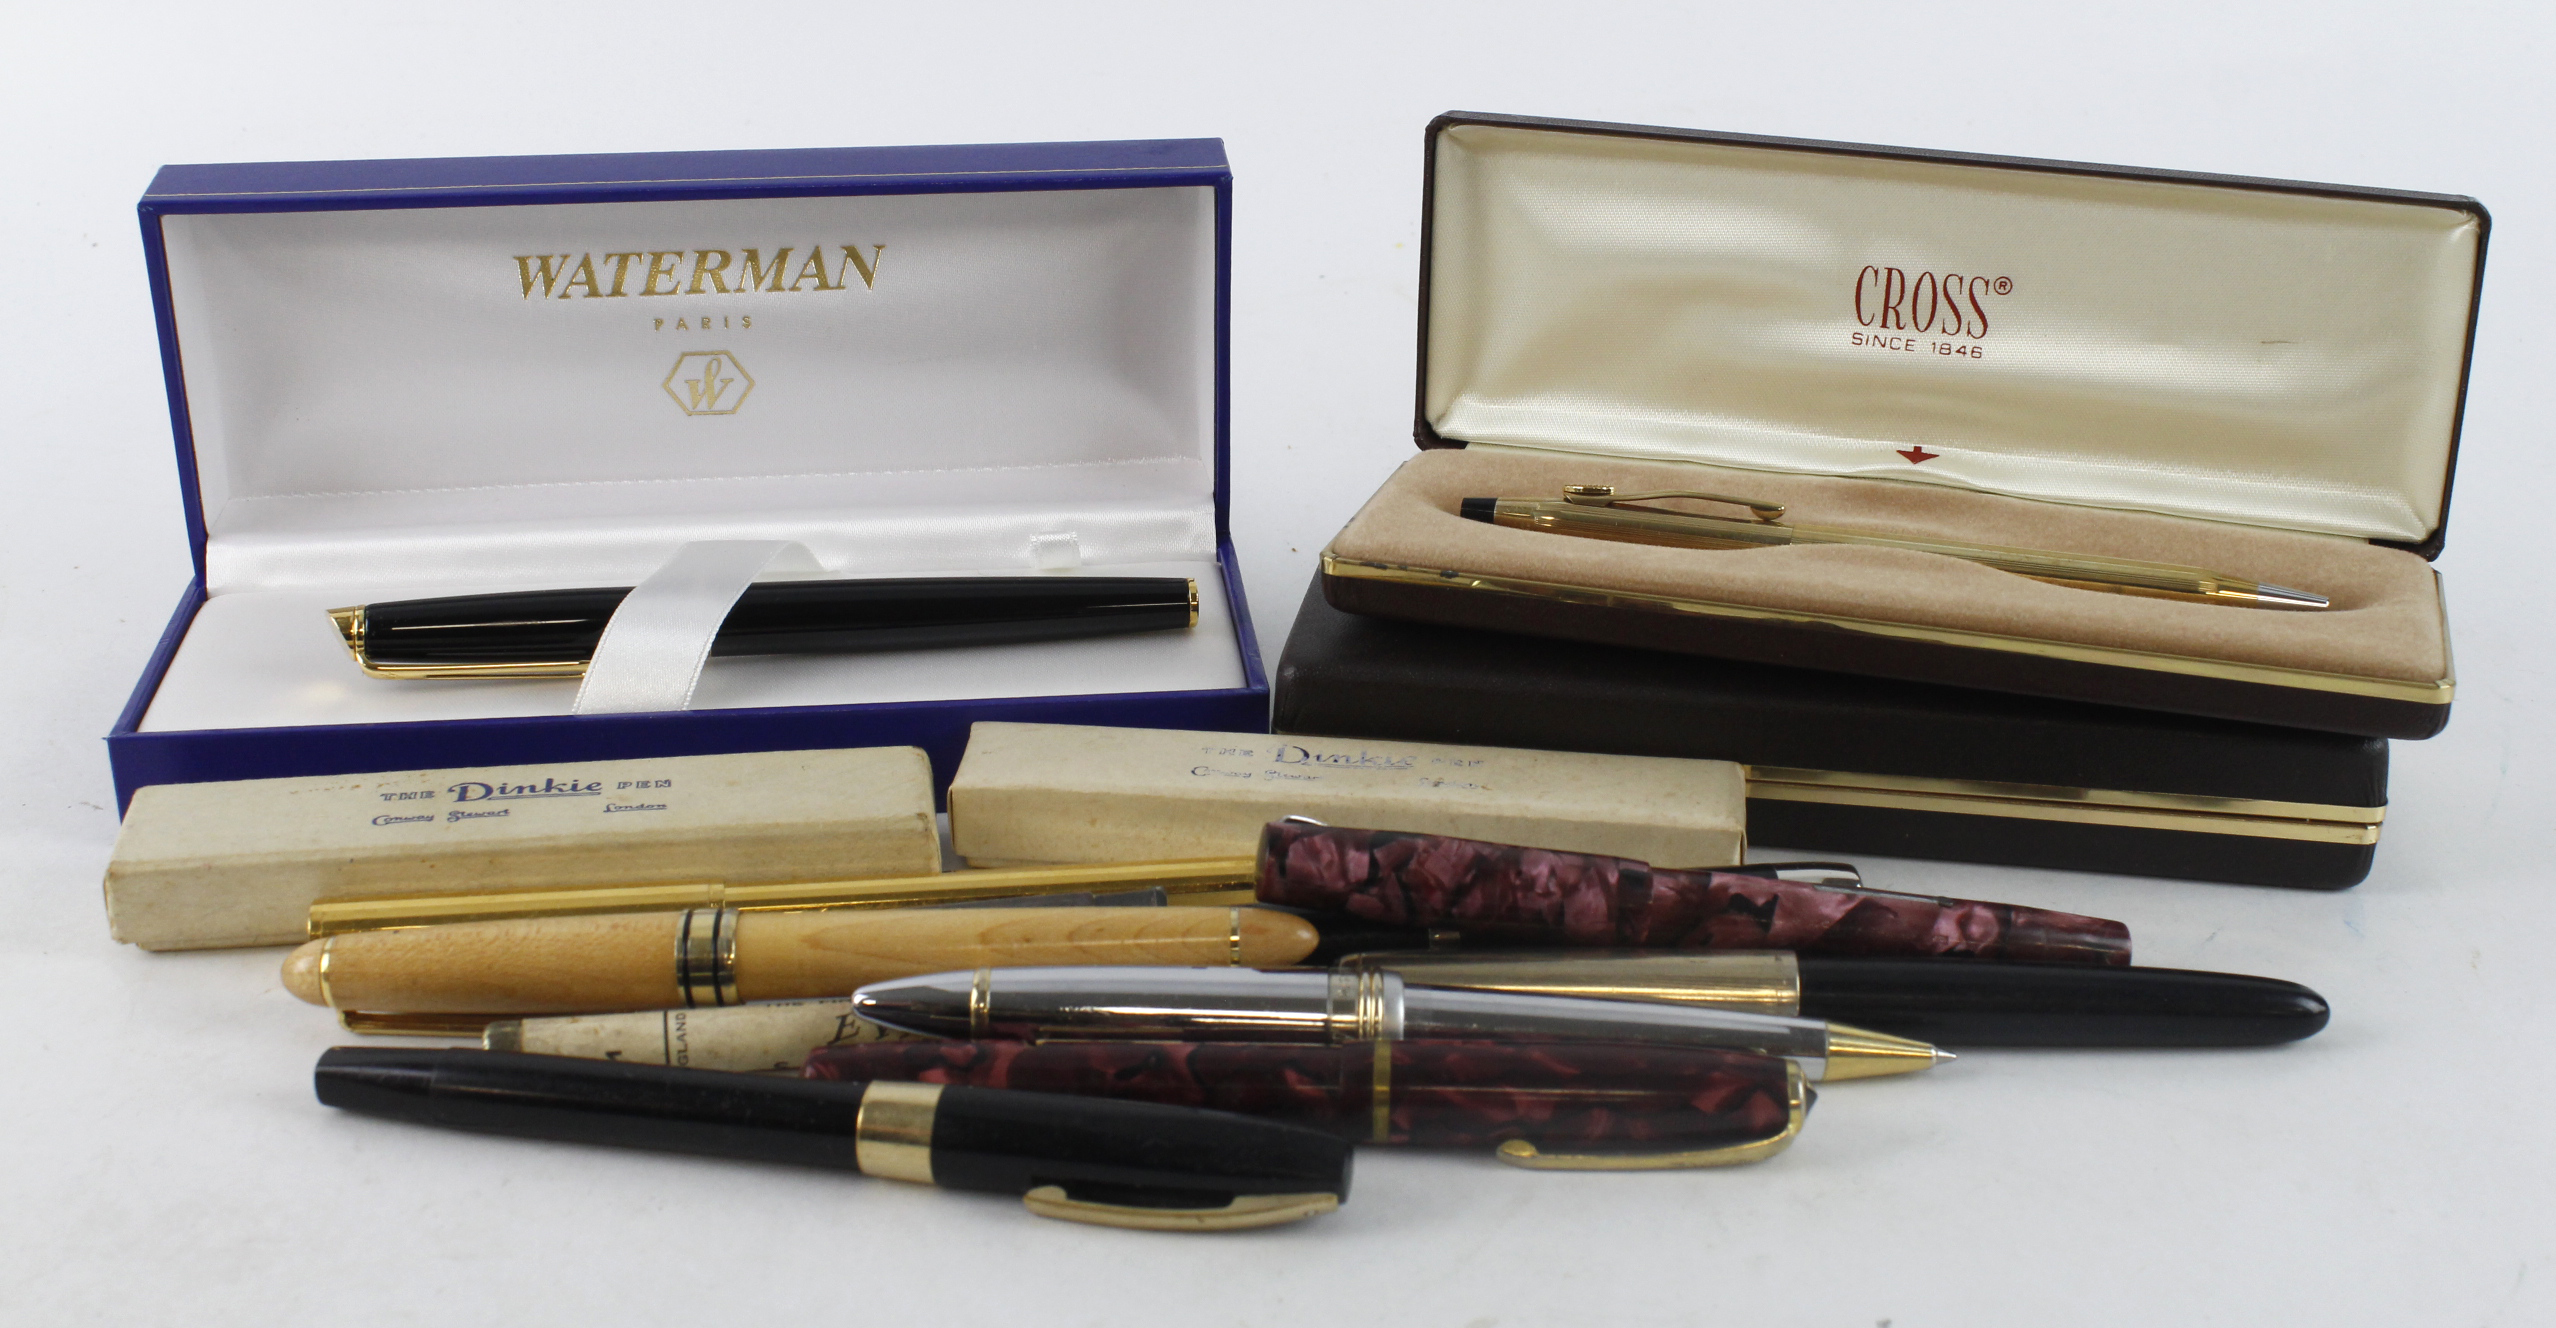 Pens. A collection of fifteen fountain pens, ballpoint pens, pencils etc., makers include Parker,